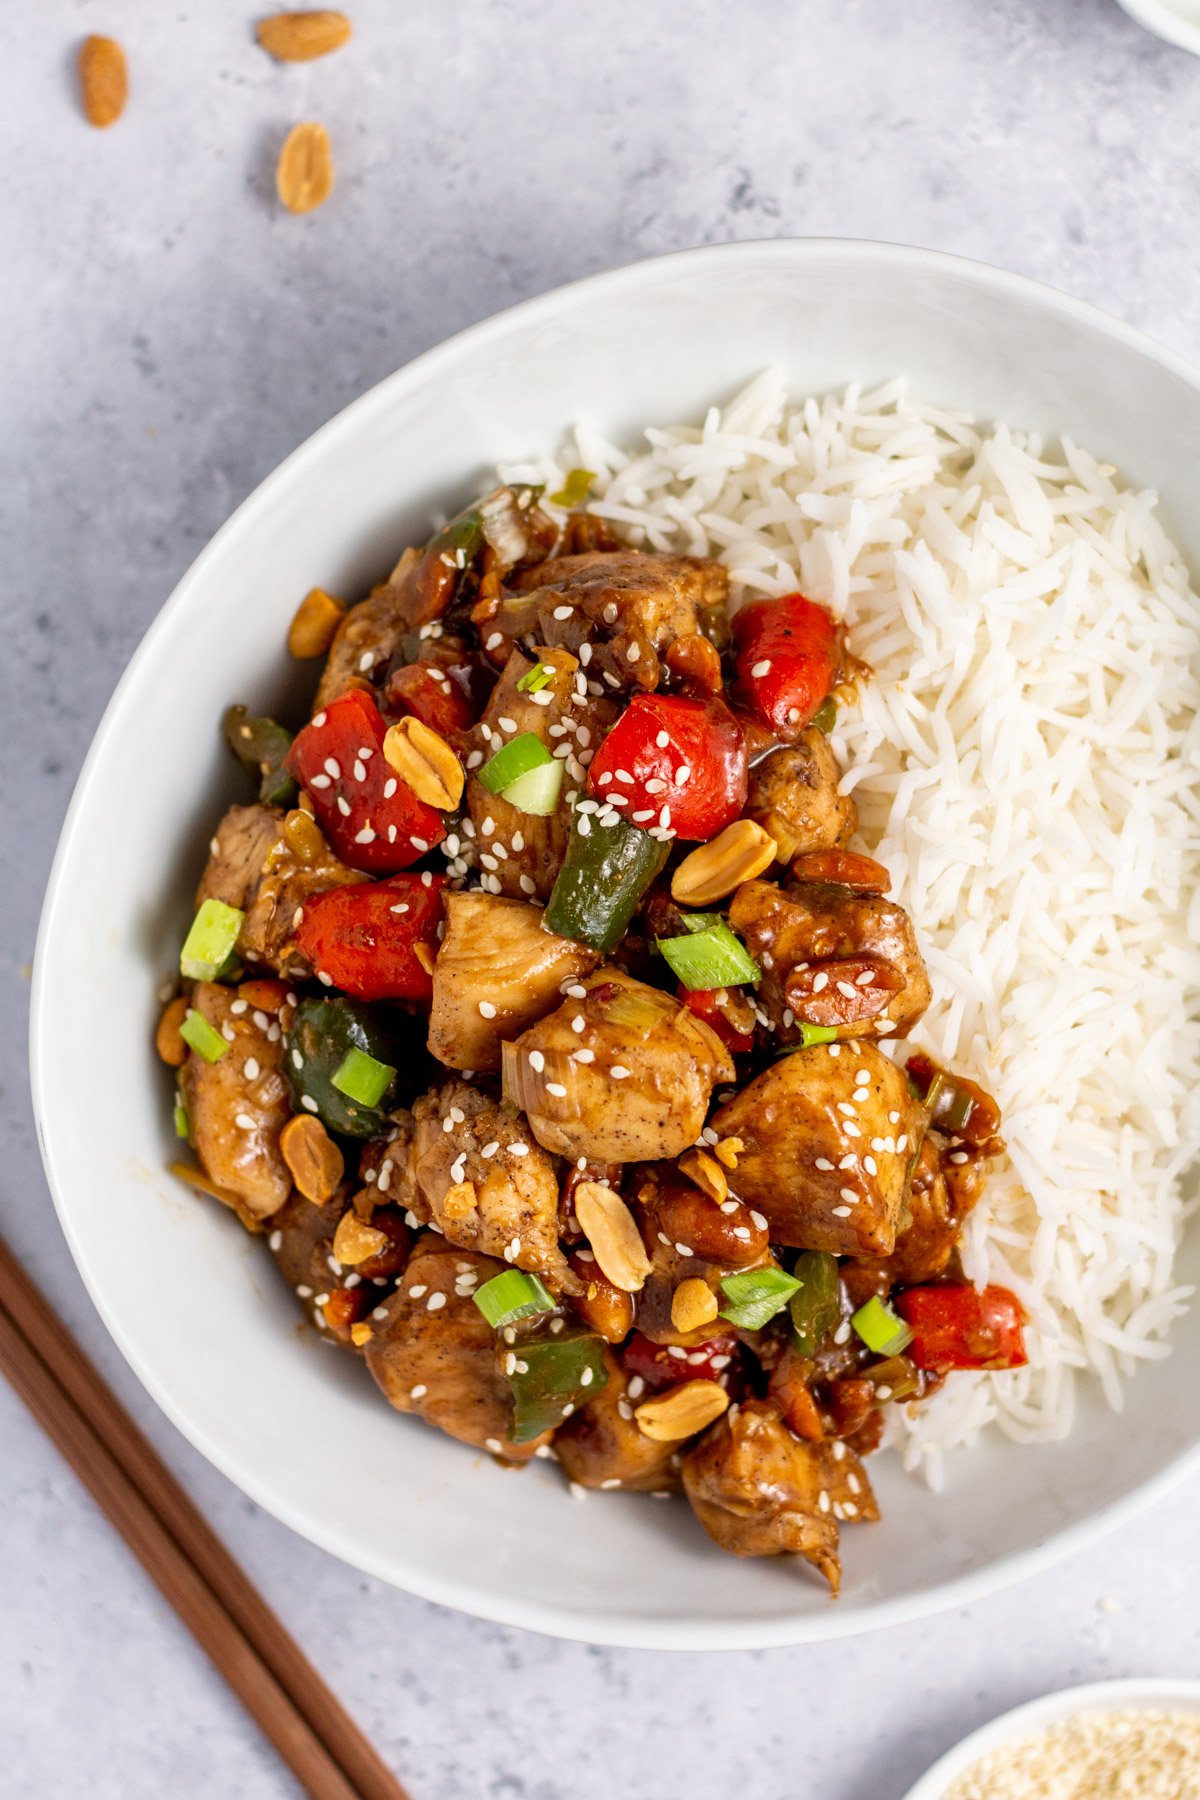 This kung pao chicken stir fry is made in one skillet, and is gluten-free, dairy-free and fully of vegetables! It's a quick and easy way to make your favorite takeout dish right at home in under 30 minutes. It also reheats great, making it not only great for a weeknight dinner but for a meal prep recipe as well. #chickenskillet #30minuterecipe #kungpao #onepan #mealprep